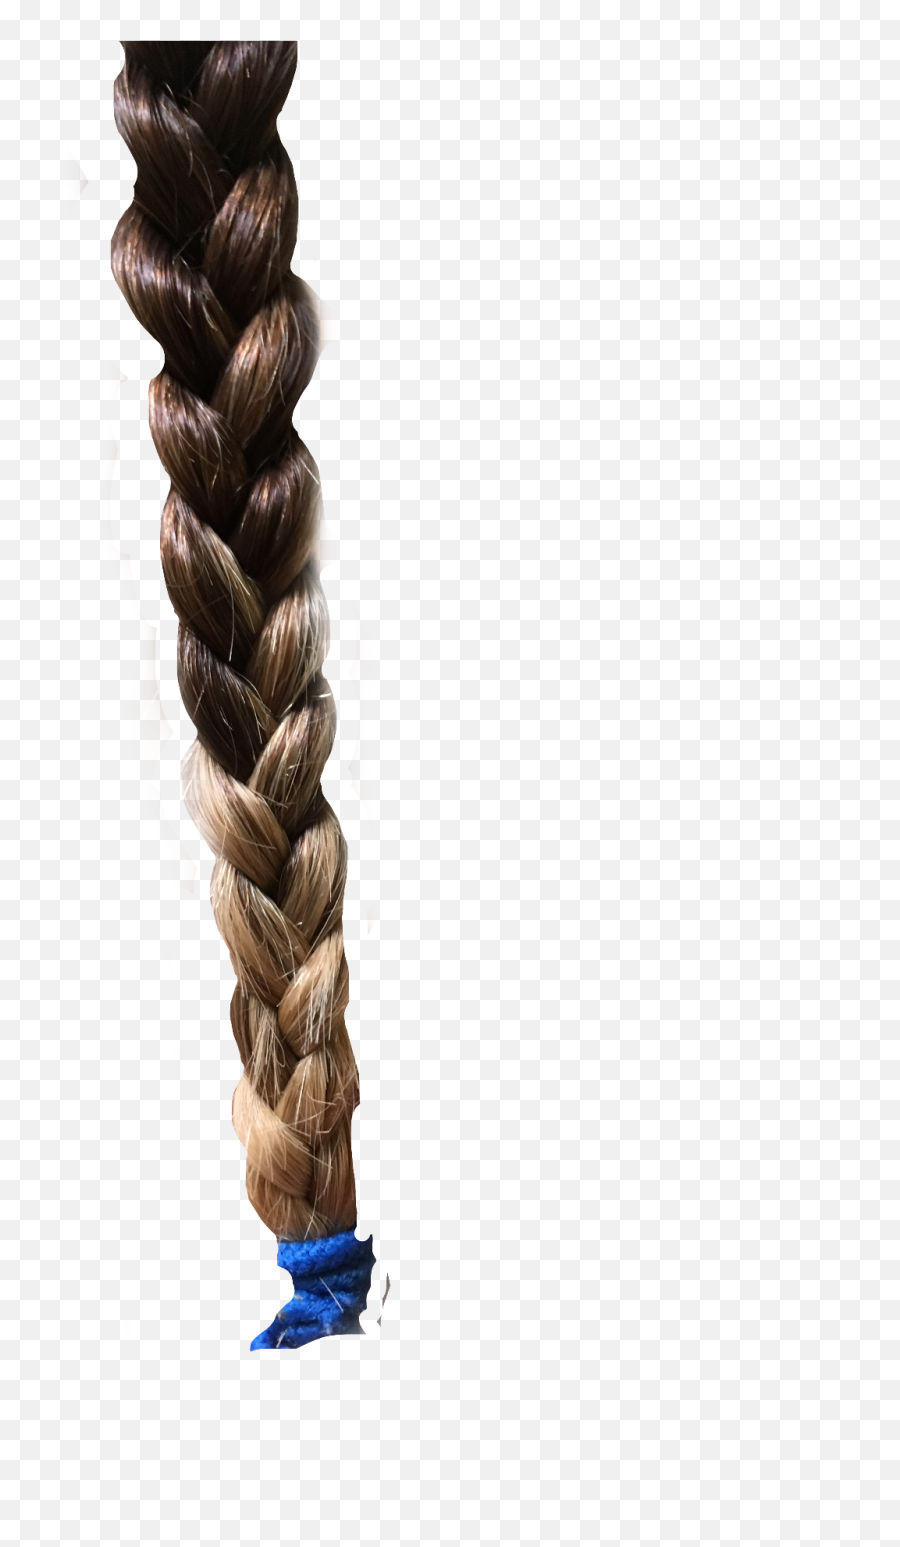 Download Free Png Hd Hair Braid Ombre Interesting - Transparent Braid Png,Wig Png